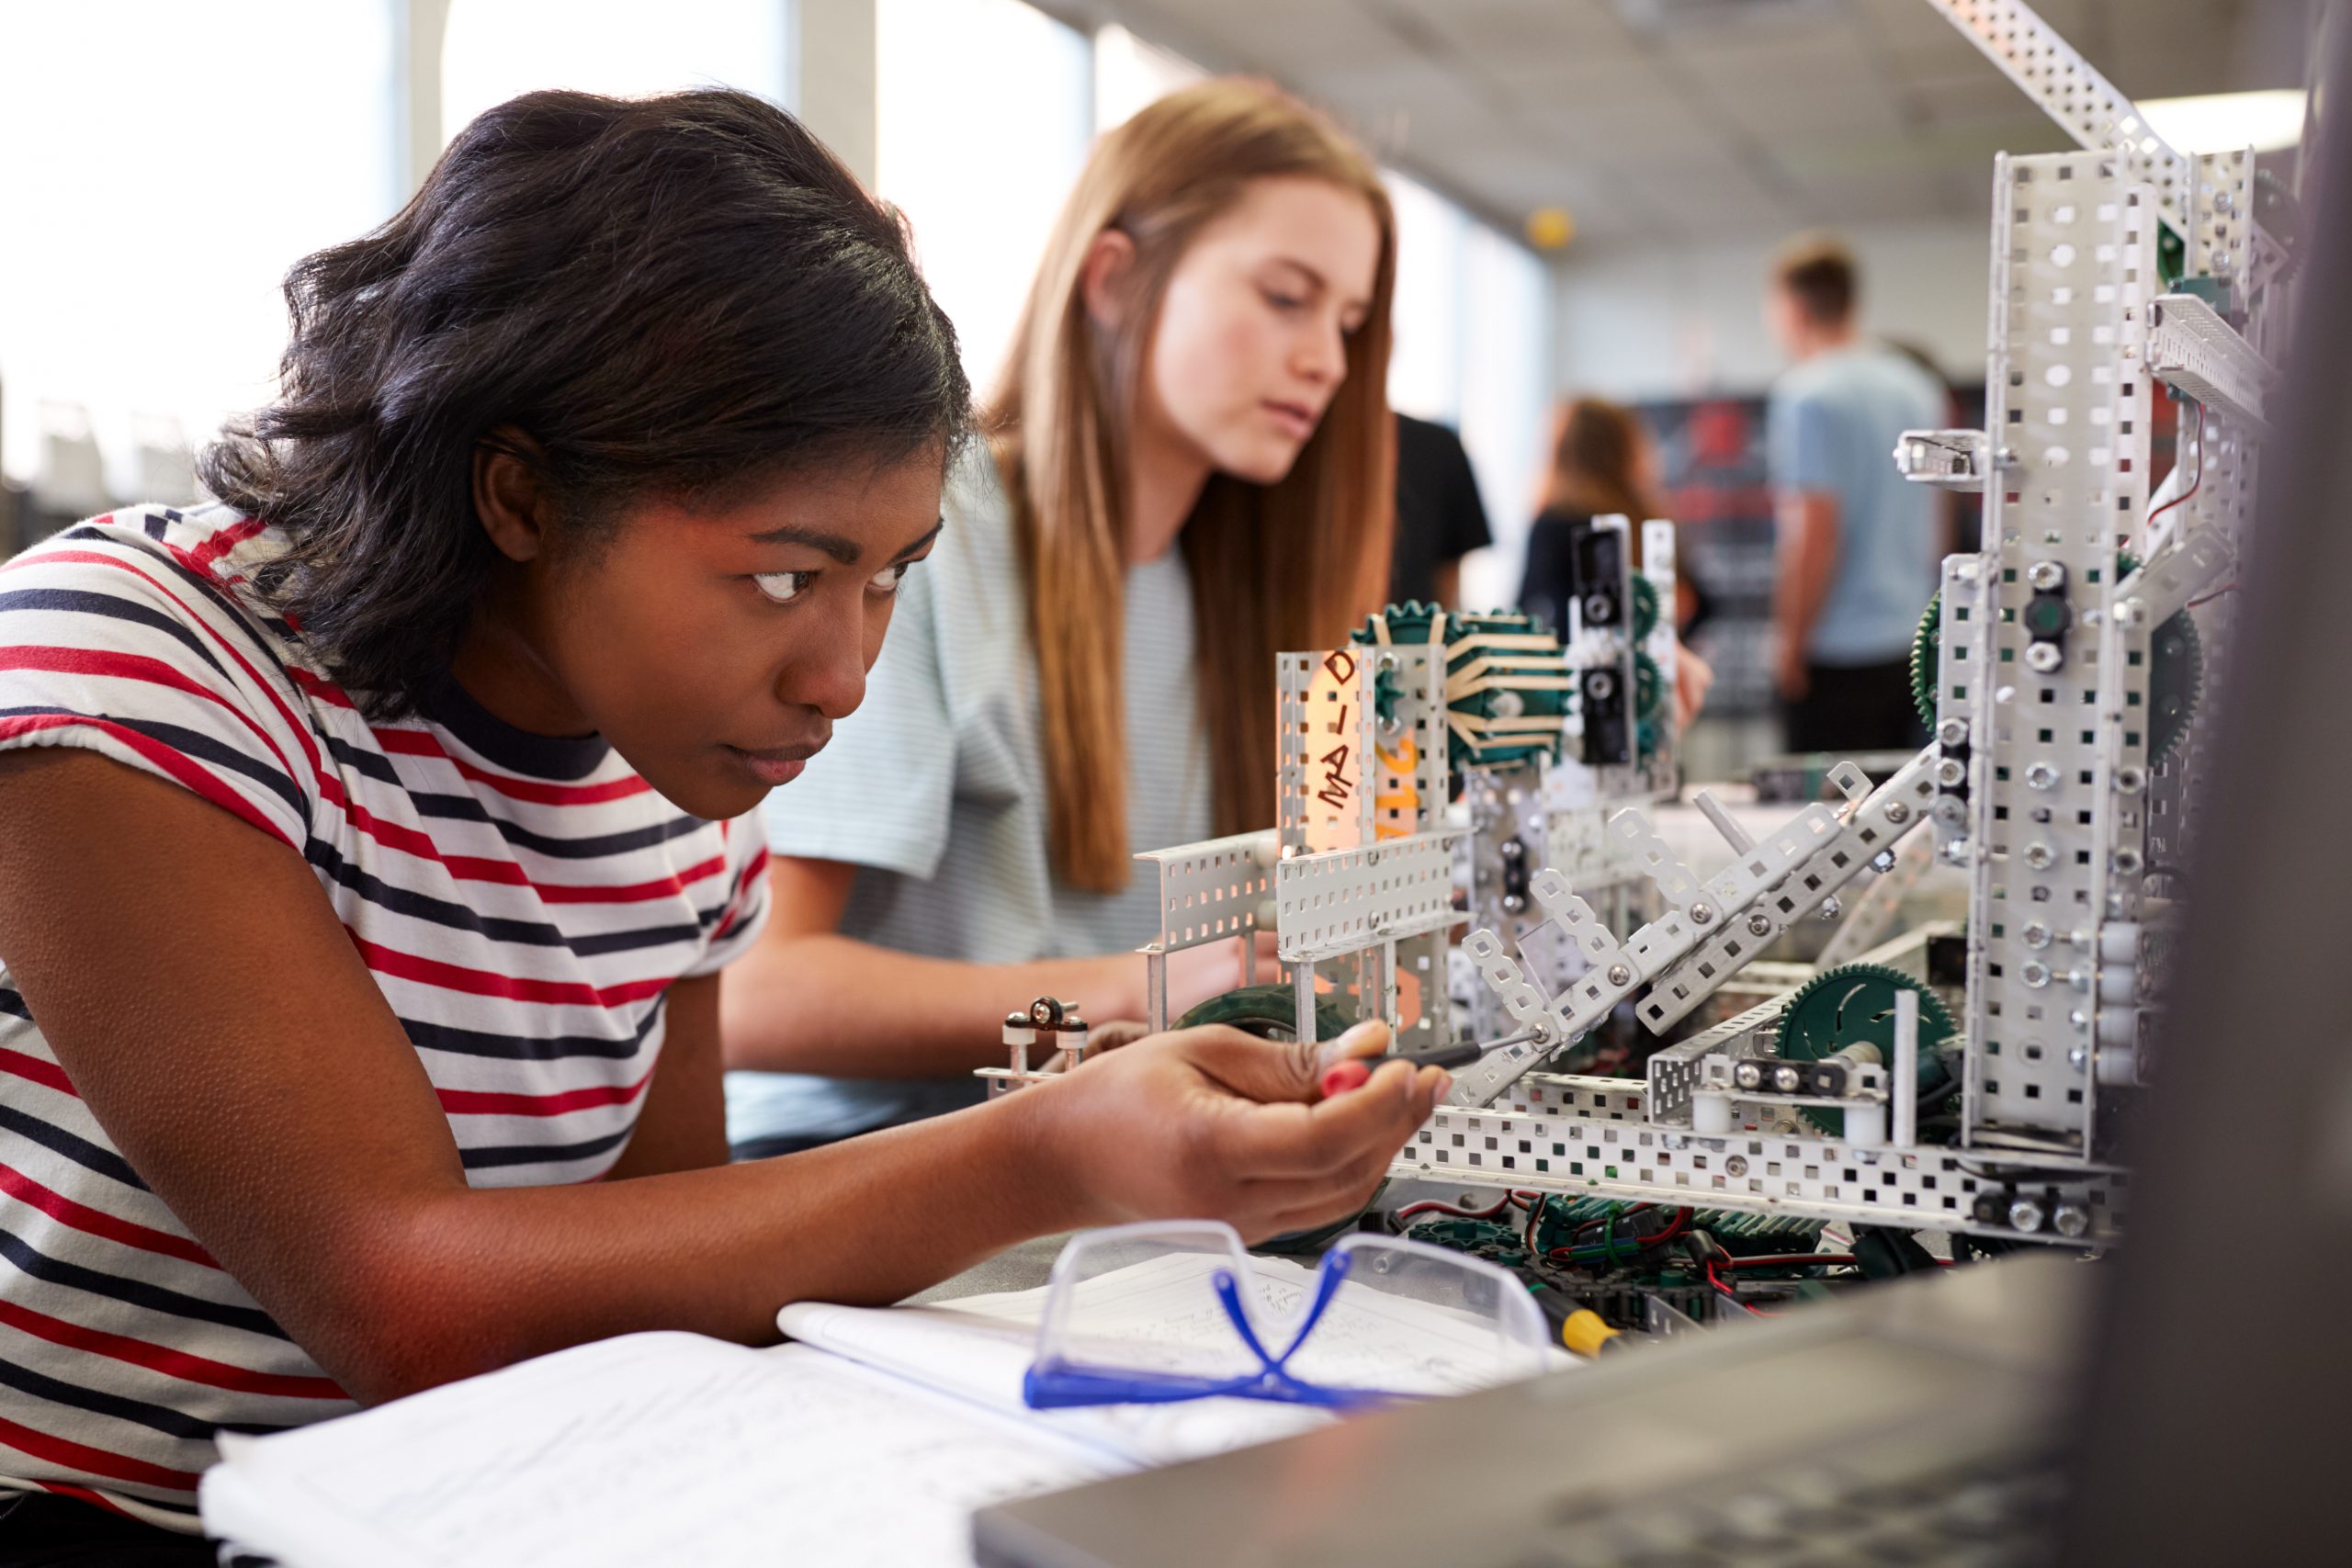 Student building robot in a classroom ©Monkey Business Images